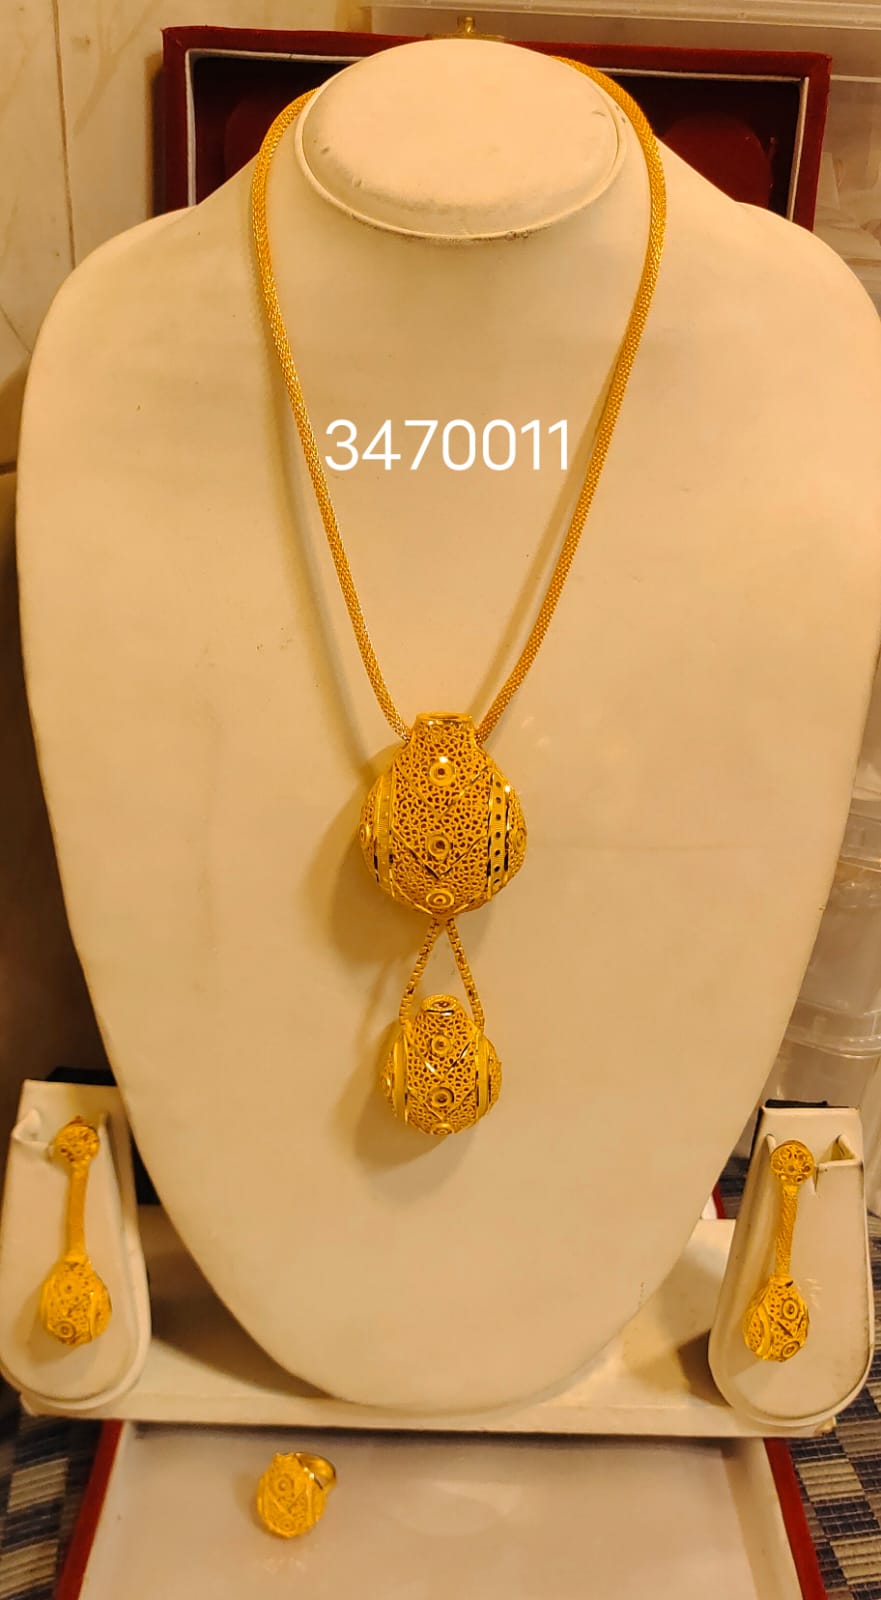 Necklace 423